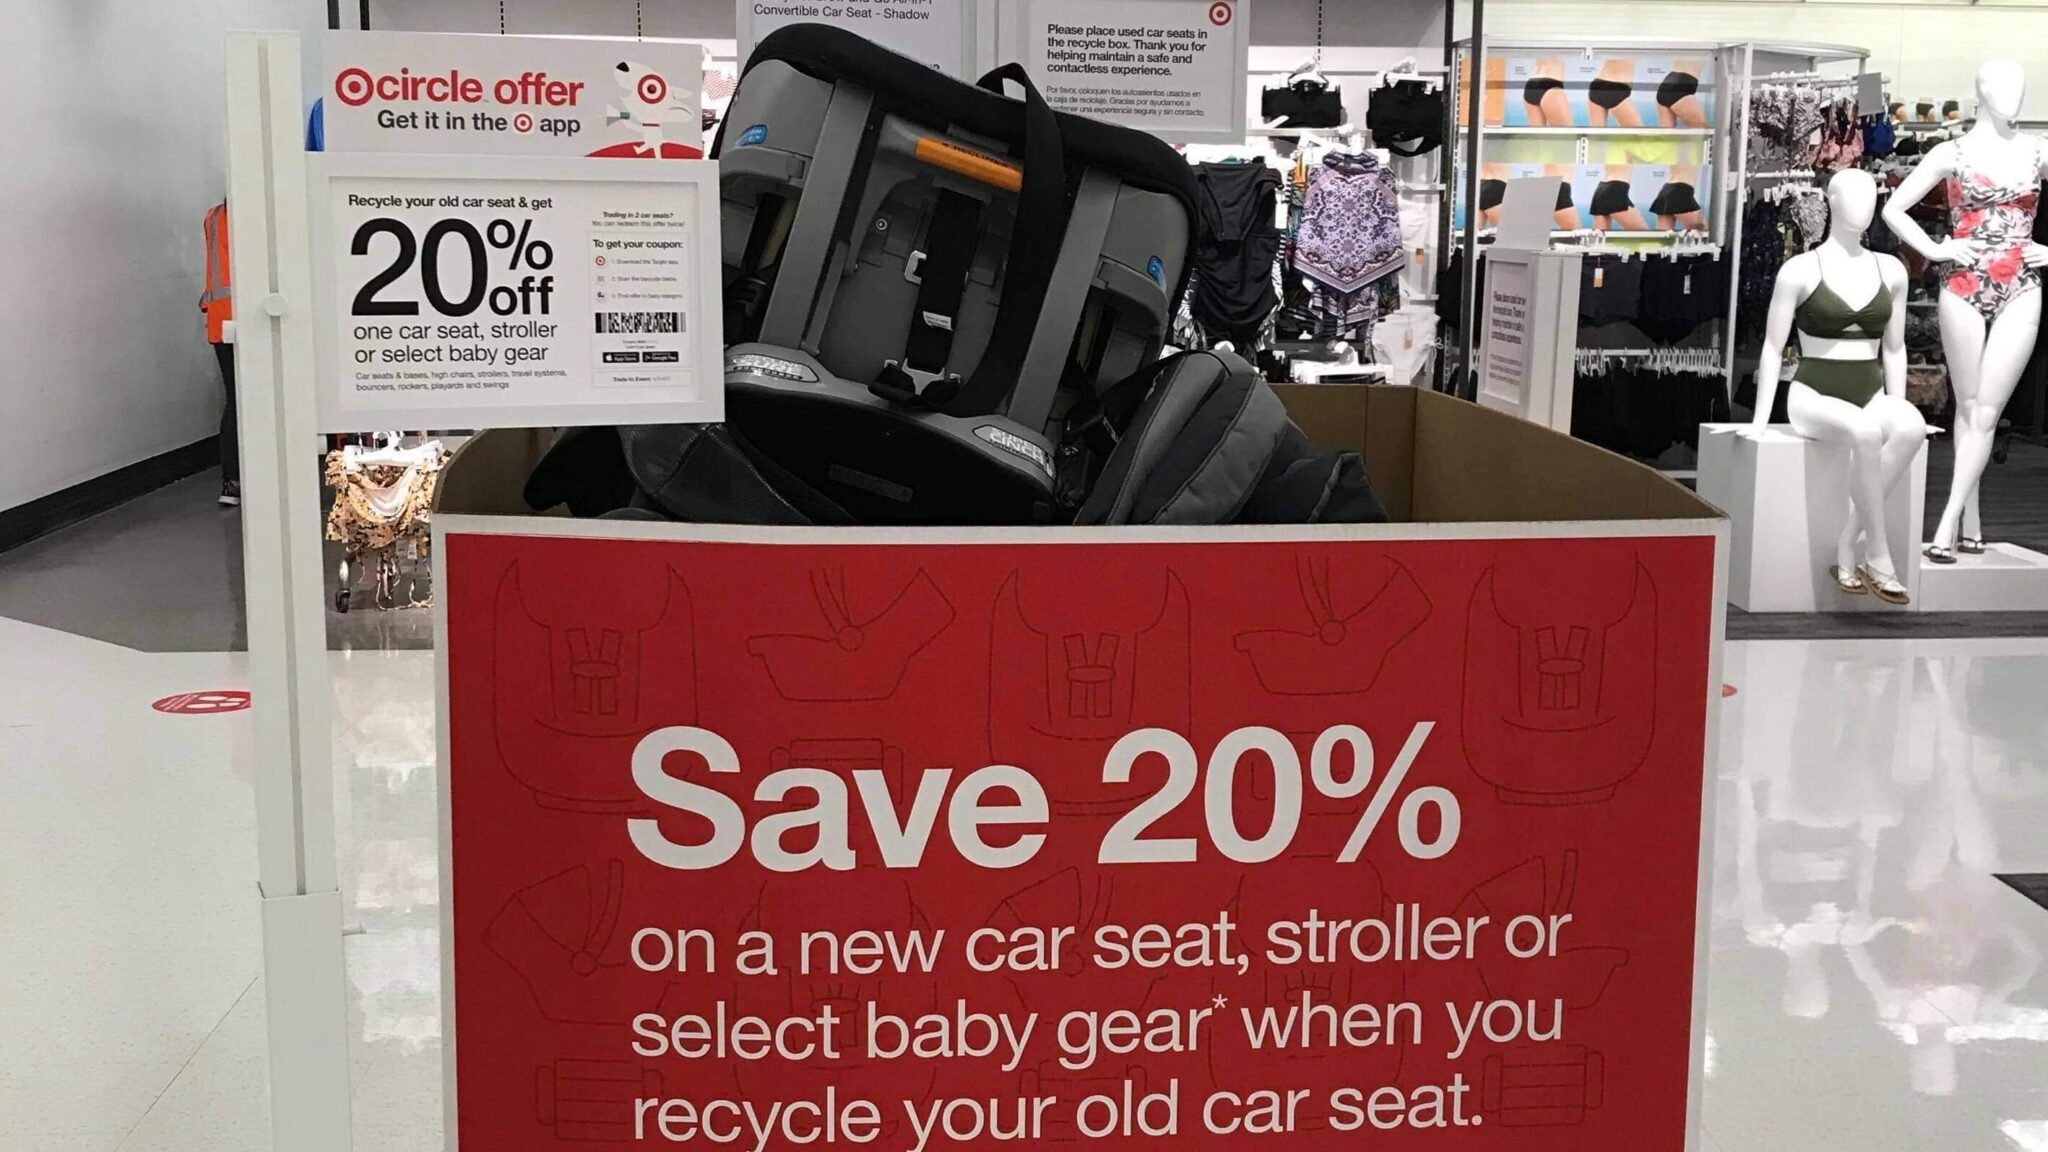 target-car-seat-trade-in-event-returns-today-april-16th-the